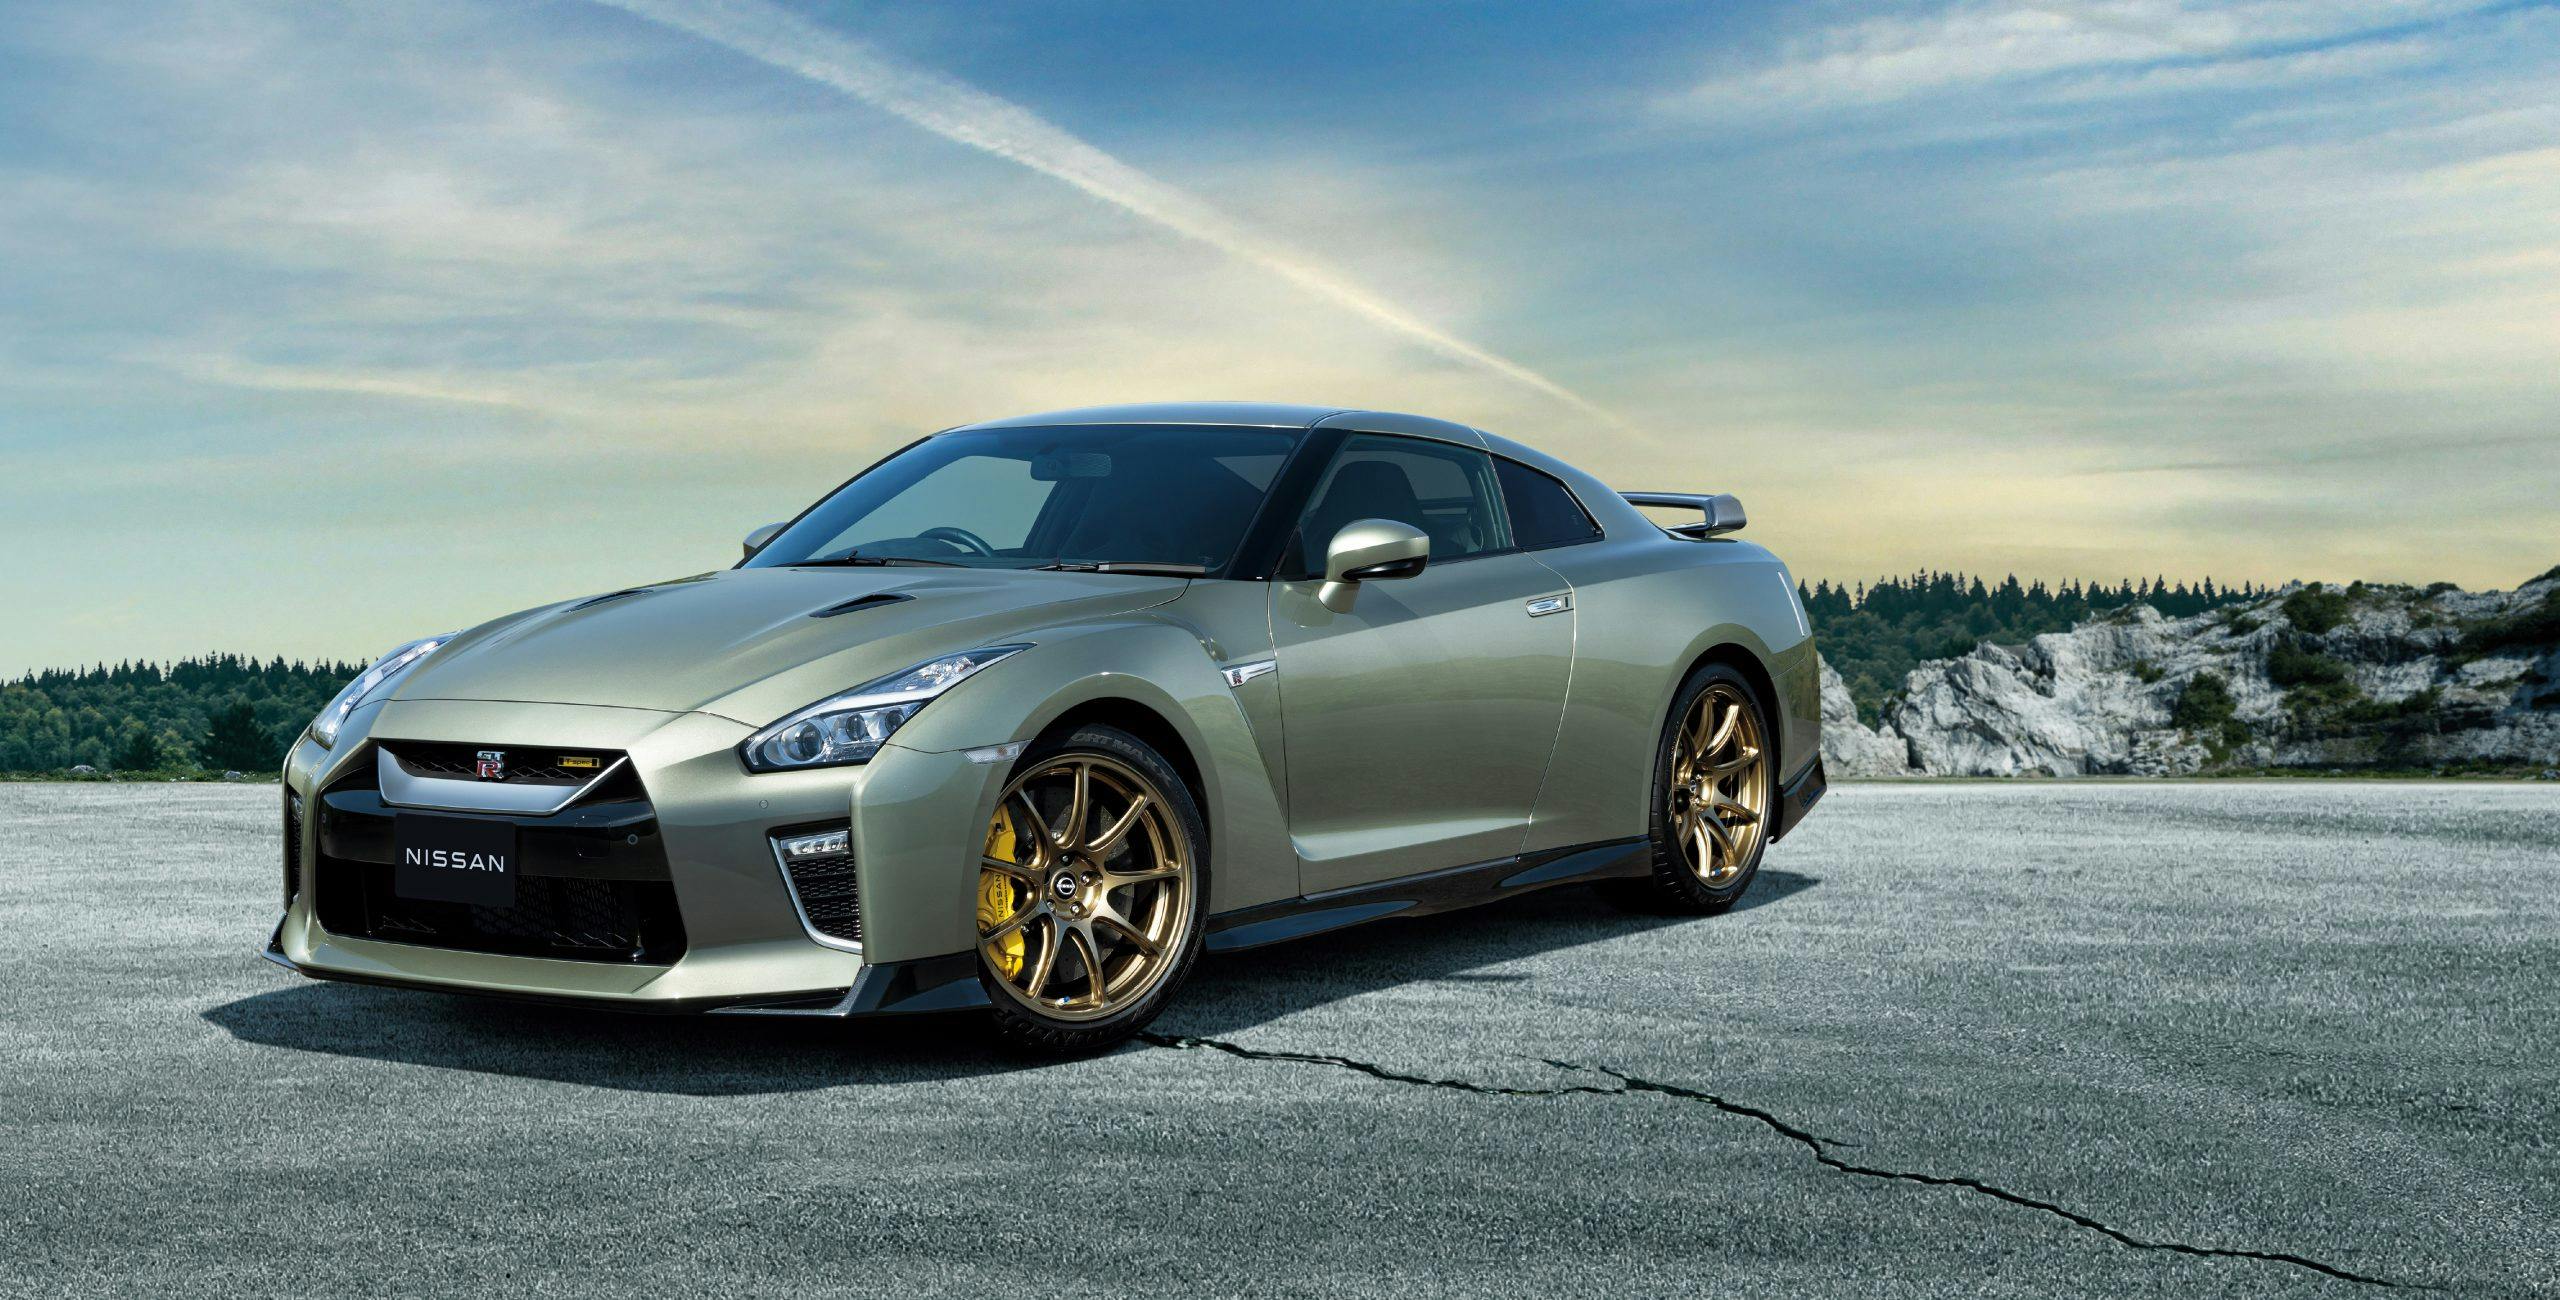 2022 Nissan GT-R front3-4